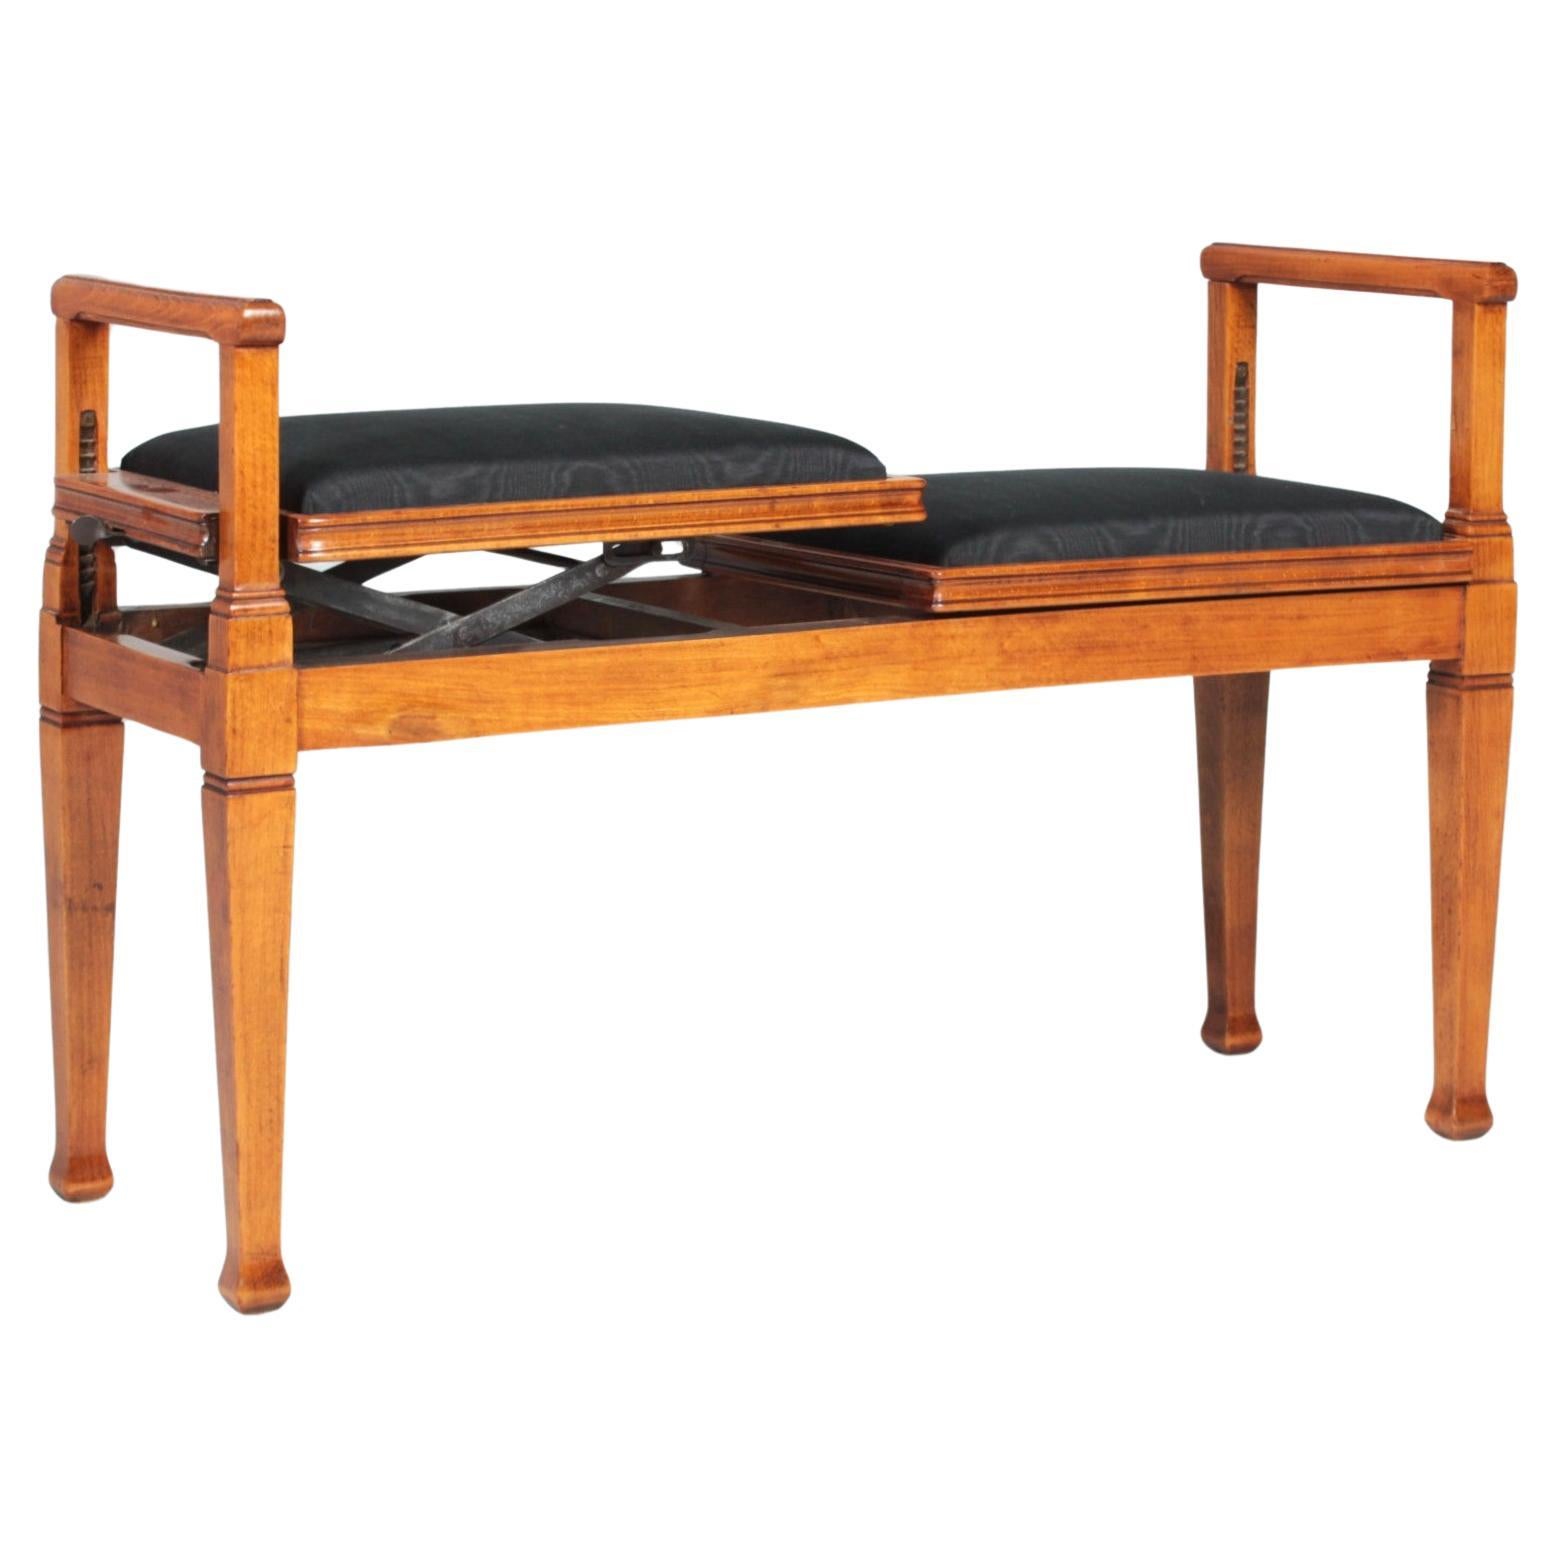 1910s High Adjustable Duett Piano Bench For Sale